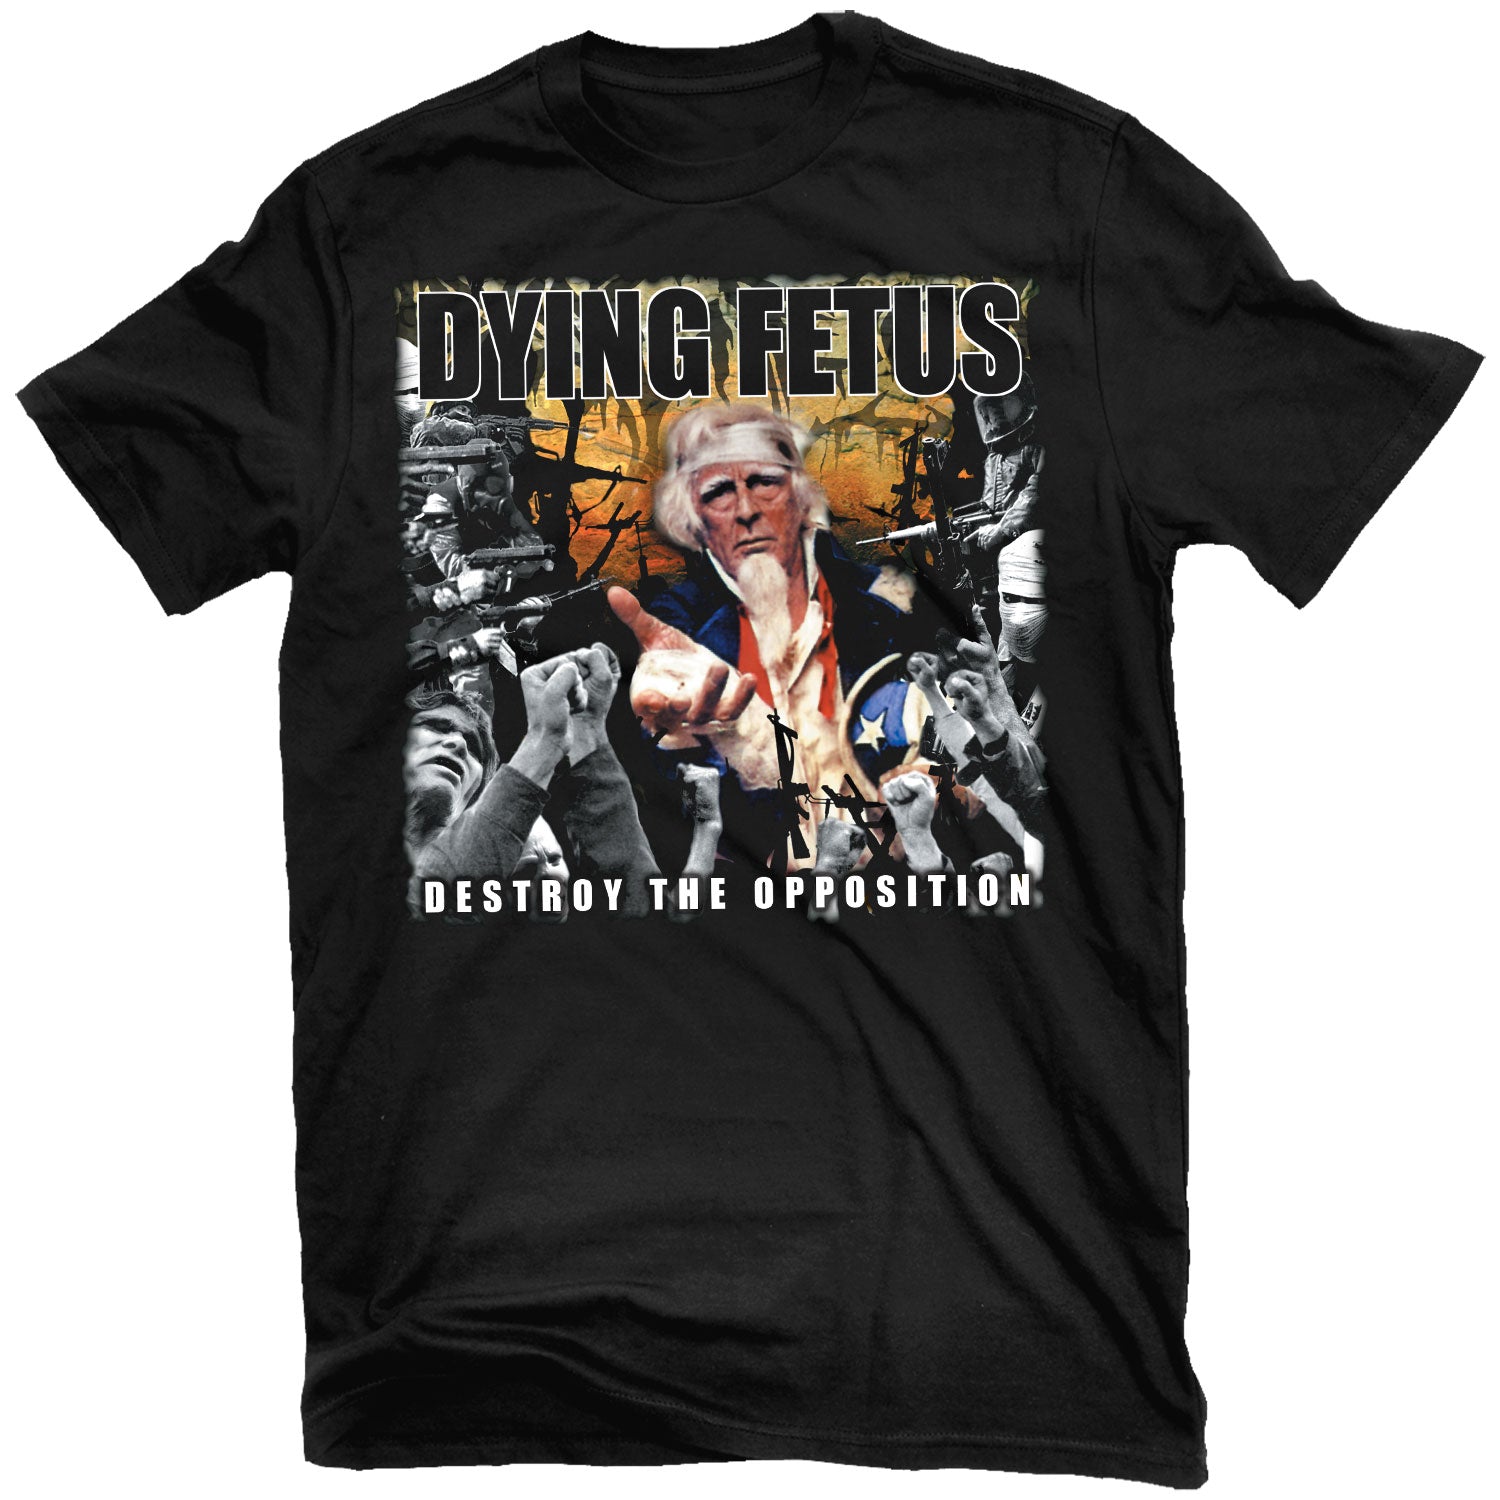 Dying Fetus "Destroy The Opposition" T-Shirt